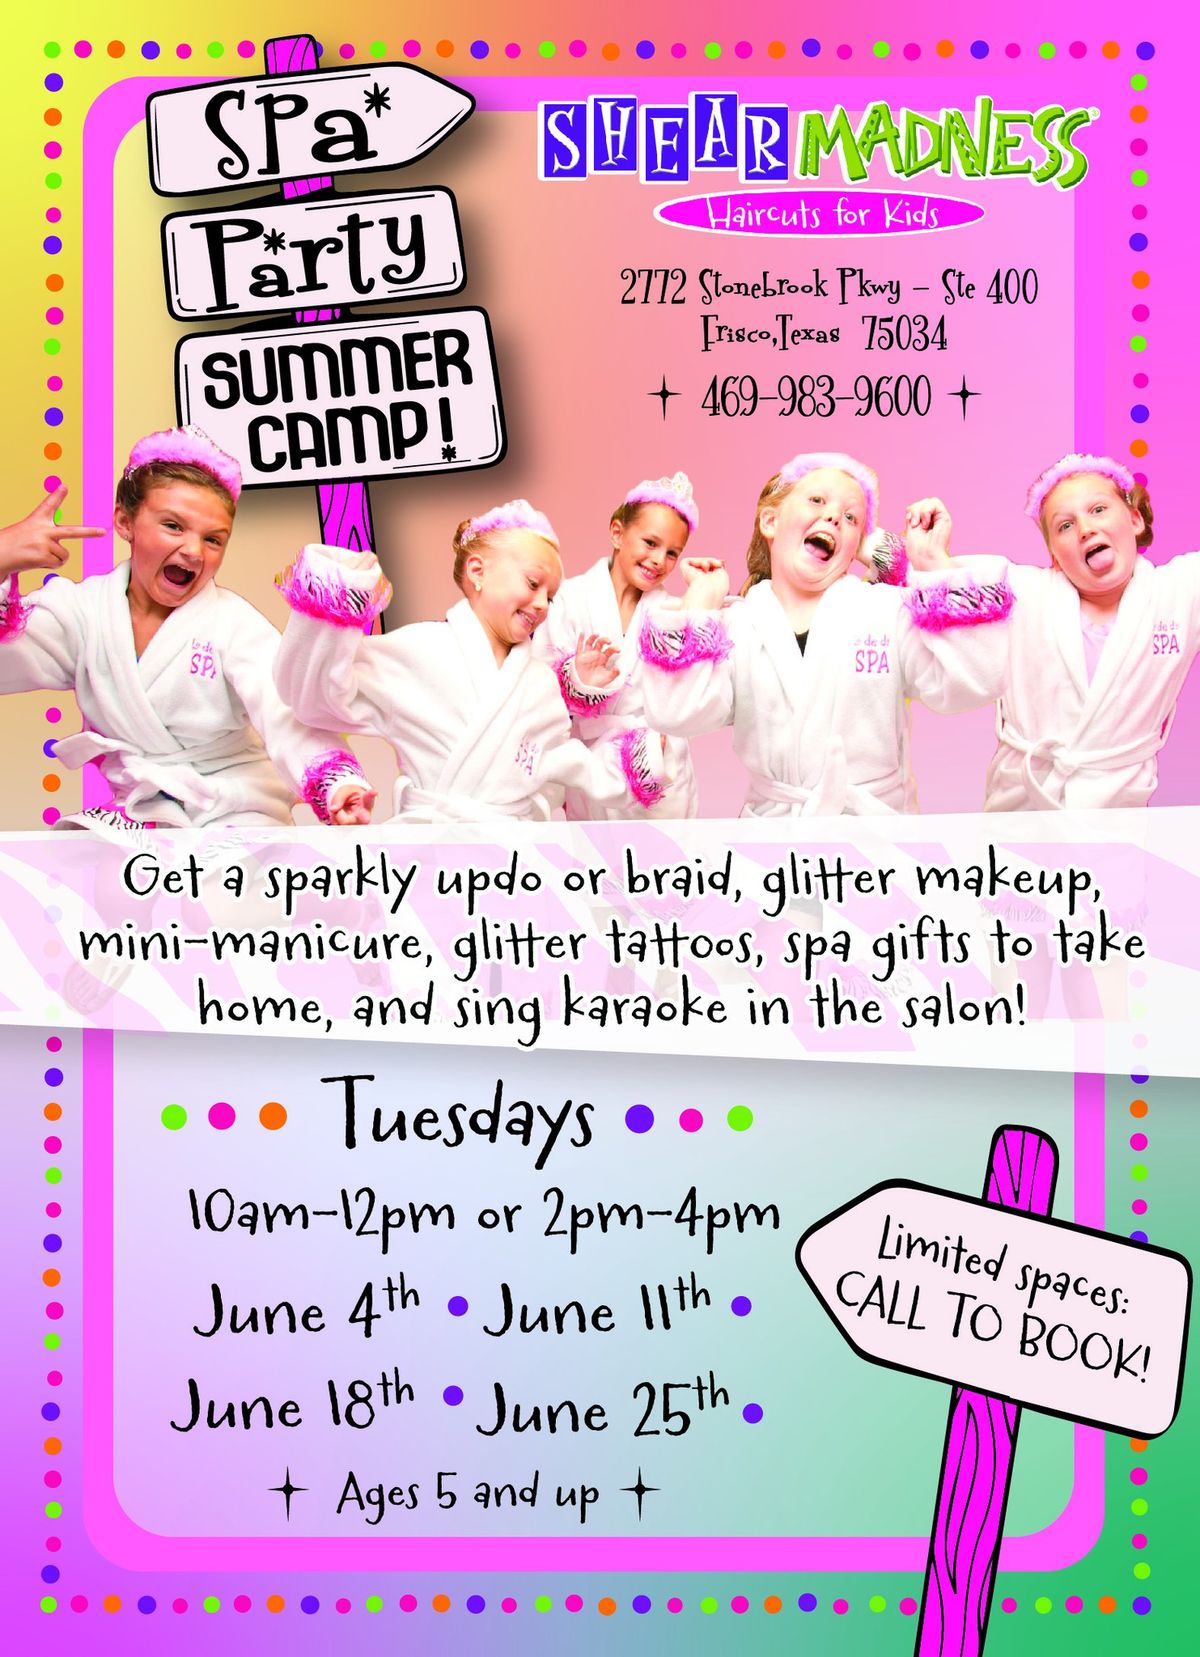 Spa Camp for Kids!